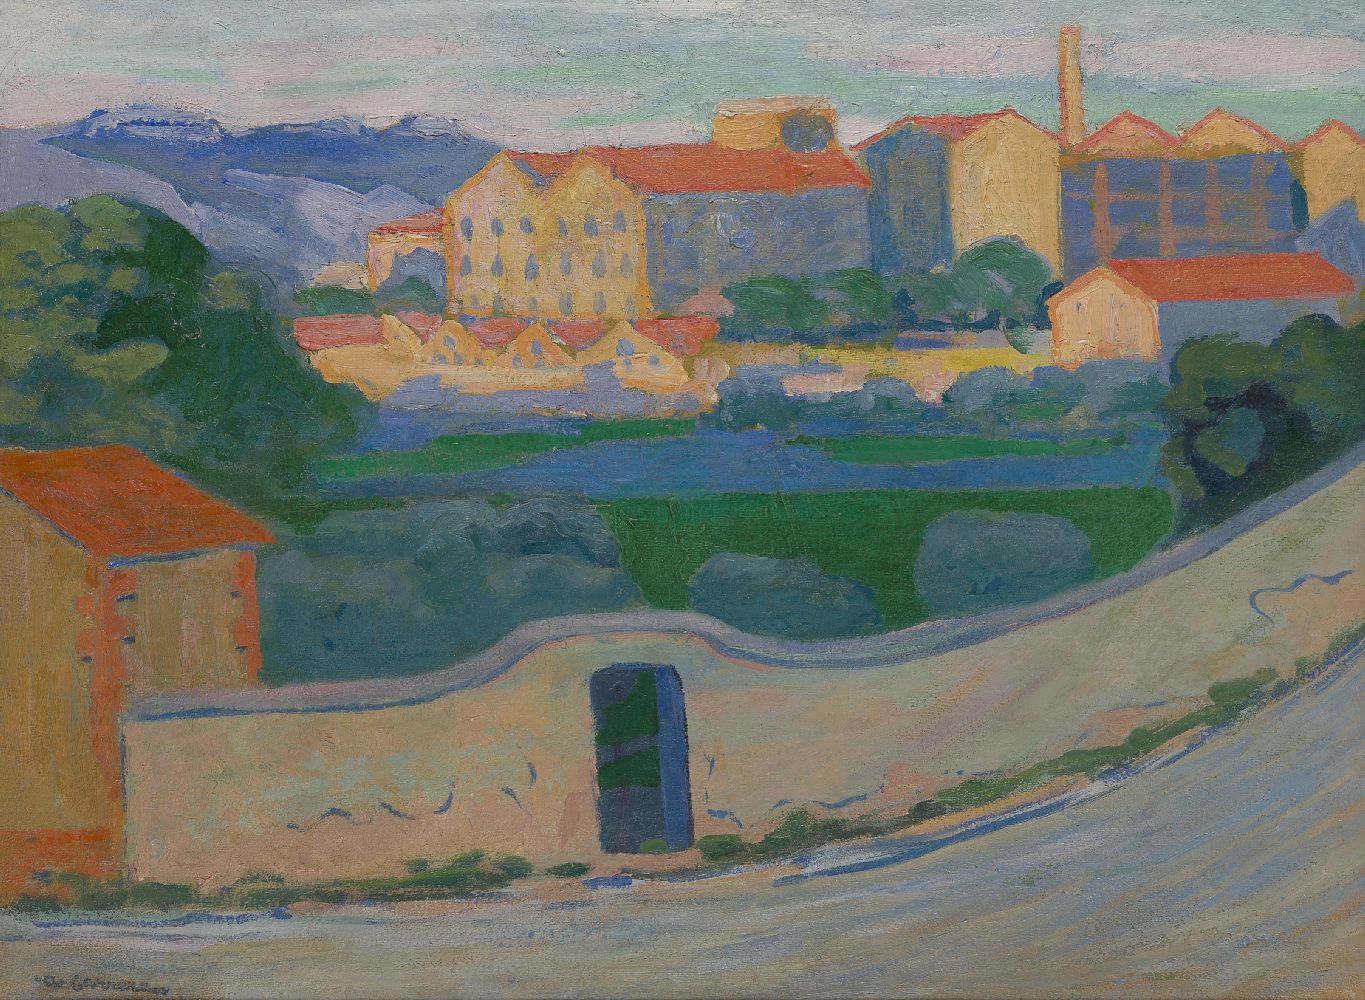 Augustin Carrera, Spanish/French, 1878-1952- Usine à Marseille; oil on canvas, signed 'A. Carrera'